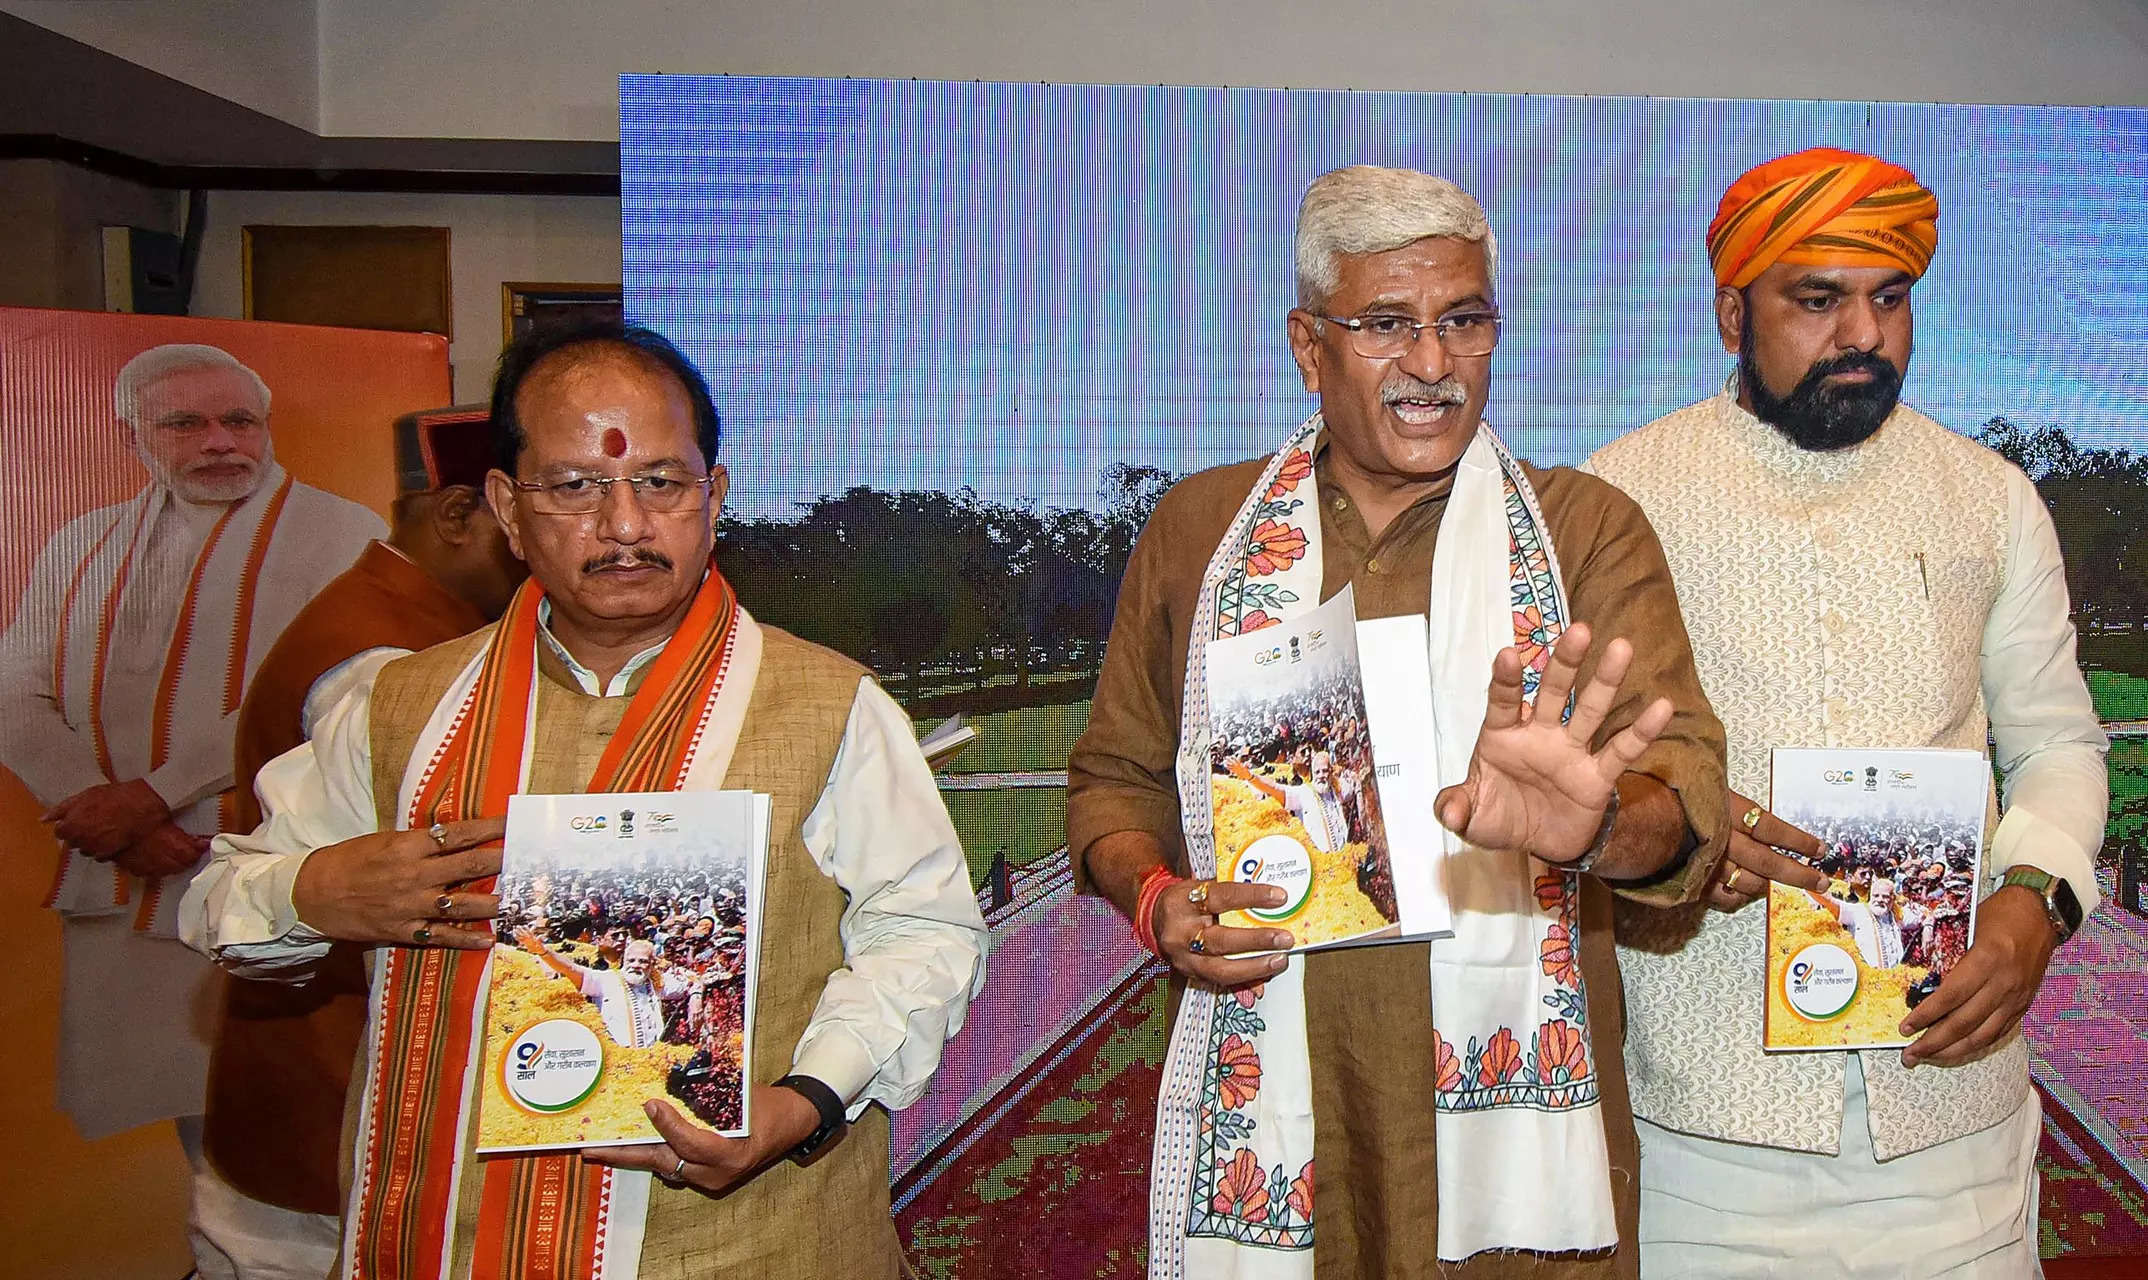 Union Jal Shakti Minister Gajendra Singh Shekhawat along with Bihar BJP President Samrat Chaudhary and LoP Vijay Kumar Sinha releases a report card on the achievement of nine years of BJP-led central government during 'Media Sanvad', in Patna. (PTI)